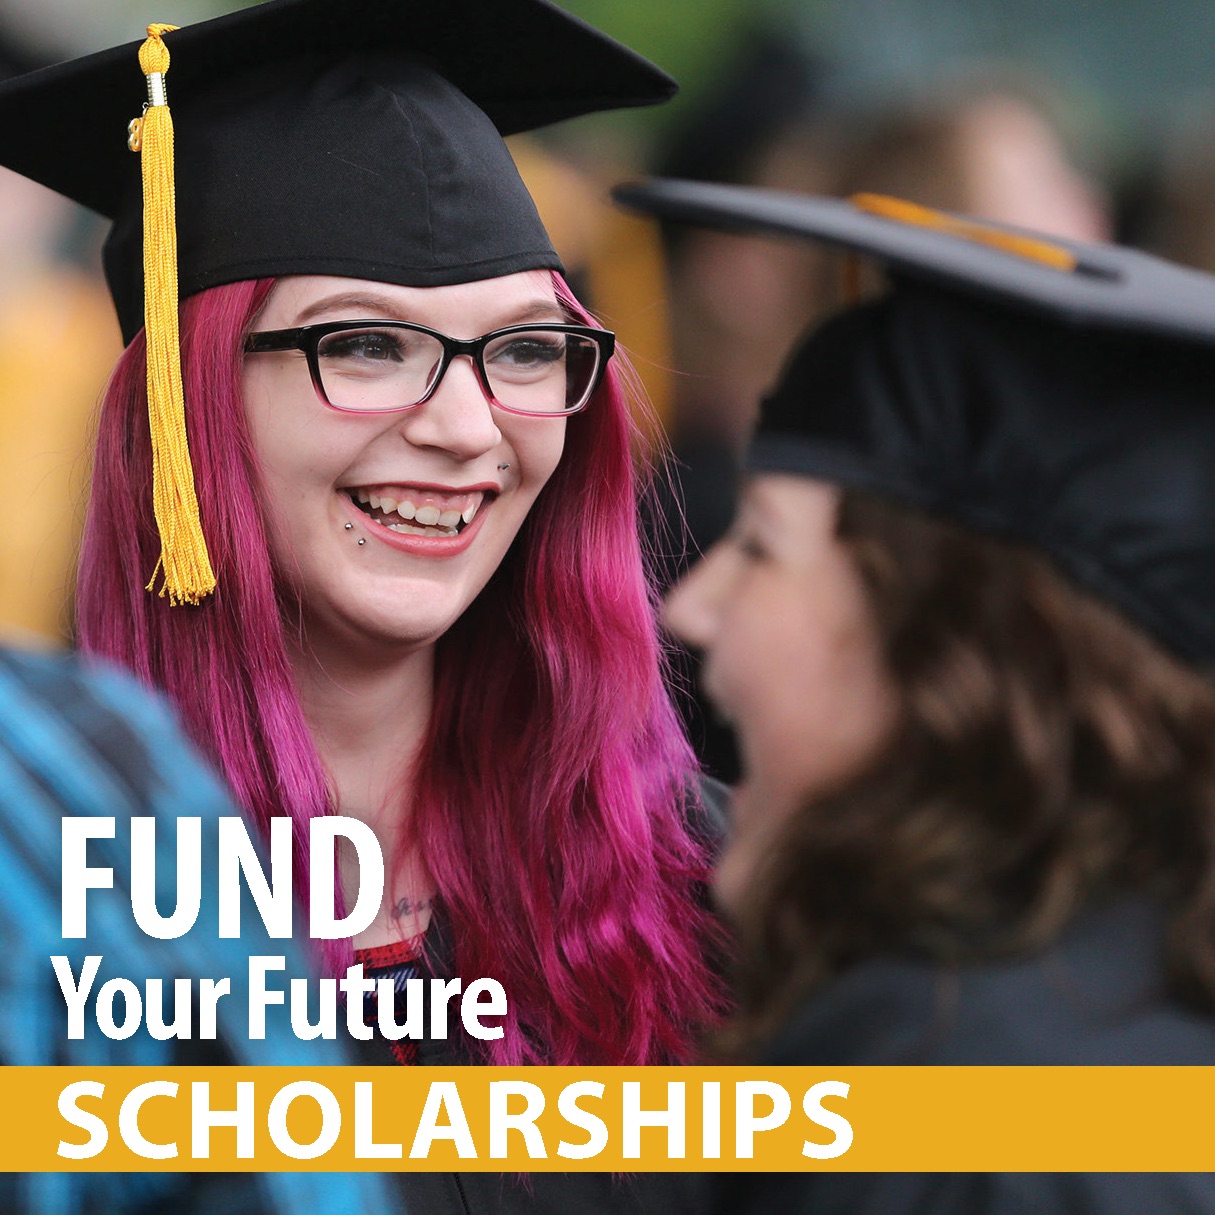 Students: Apply Now! Scholarships at Your Fingertips